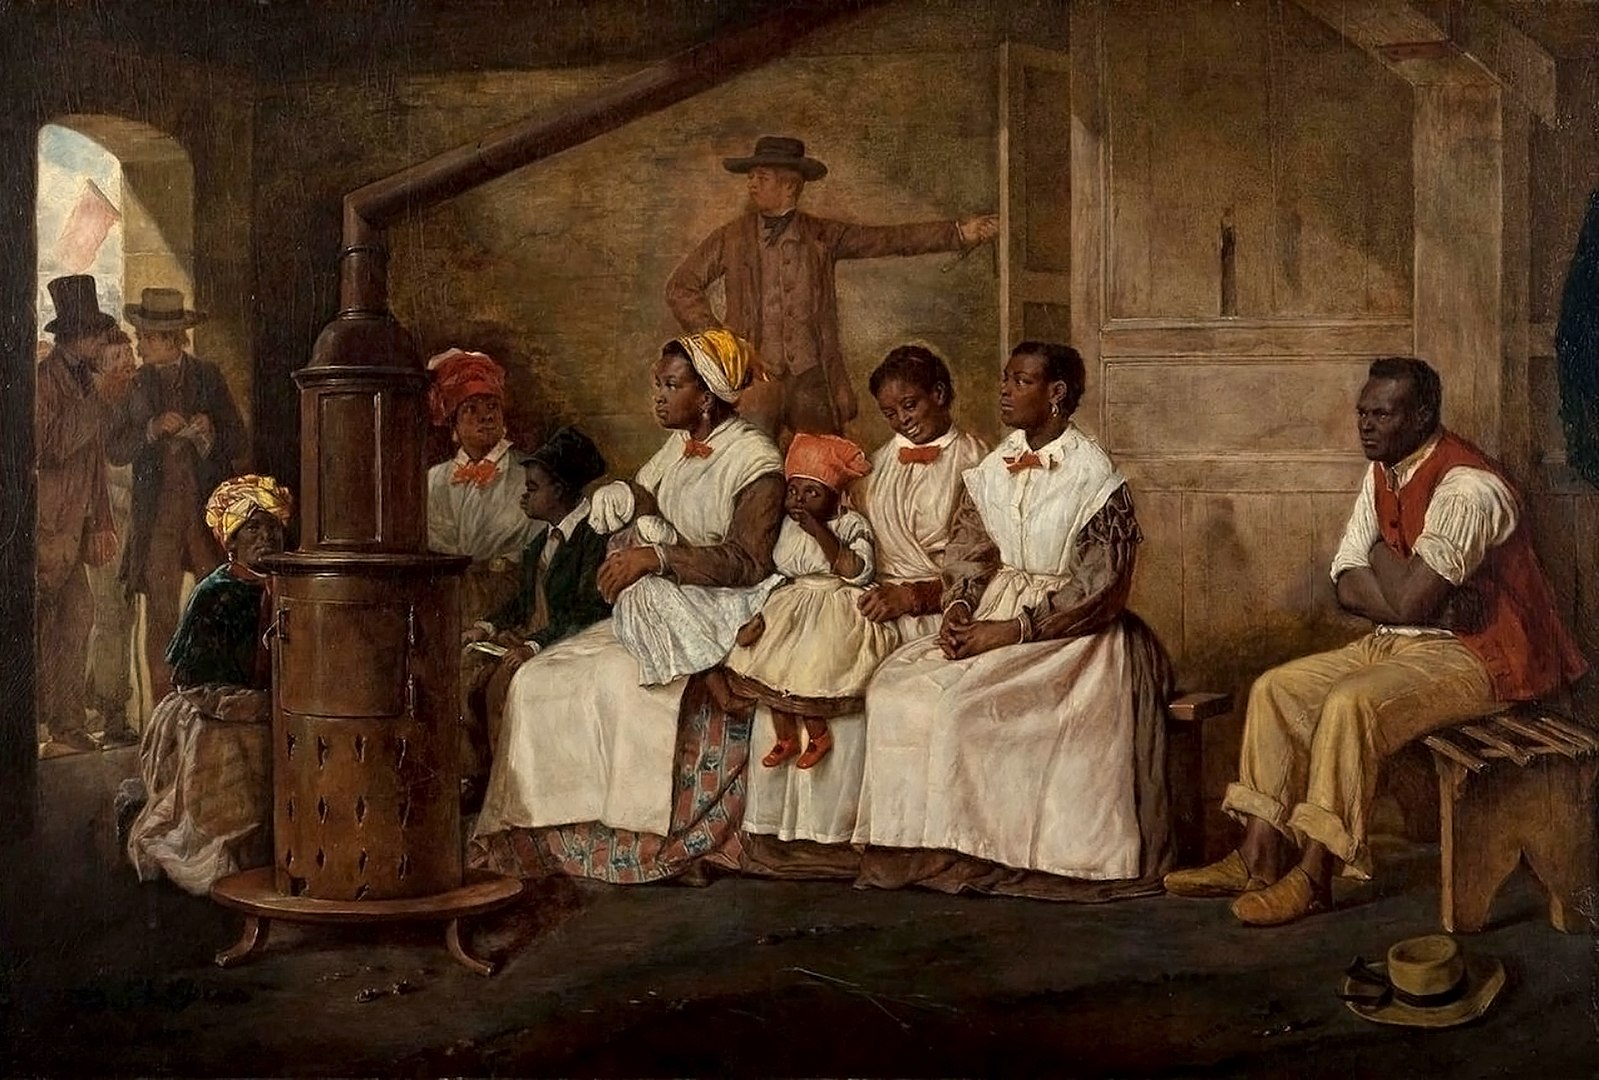 A group of slaves sit around a furnace in a darkened room.